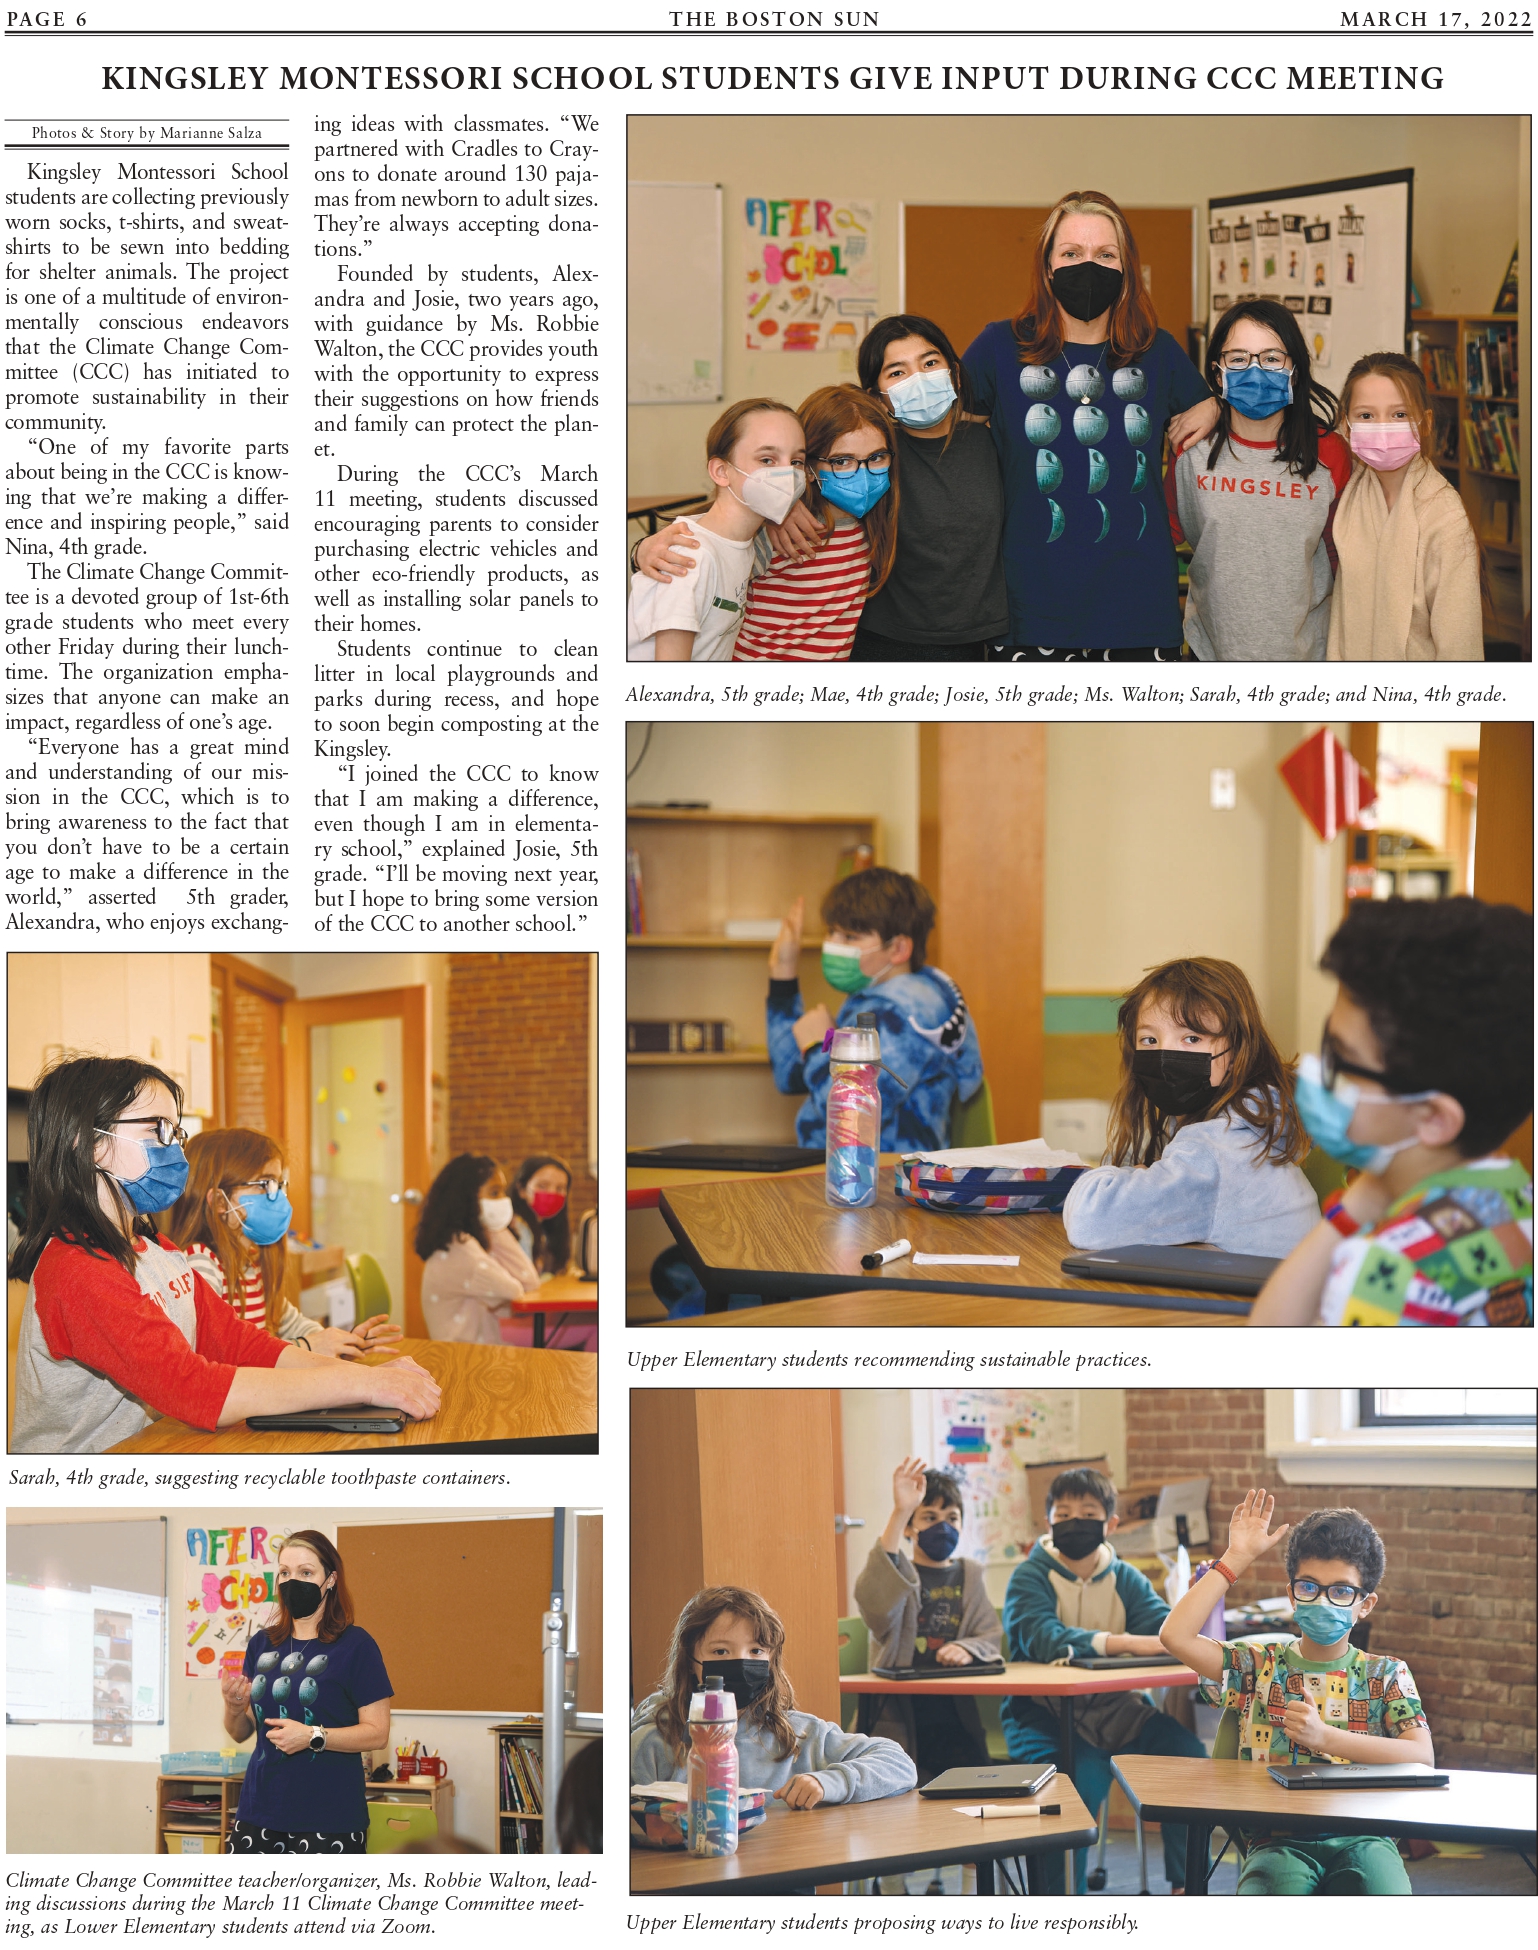 The Boston Sun news article about Kingsley Montessori School Climate Change Comittee.